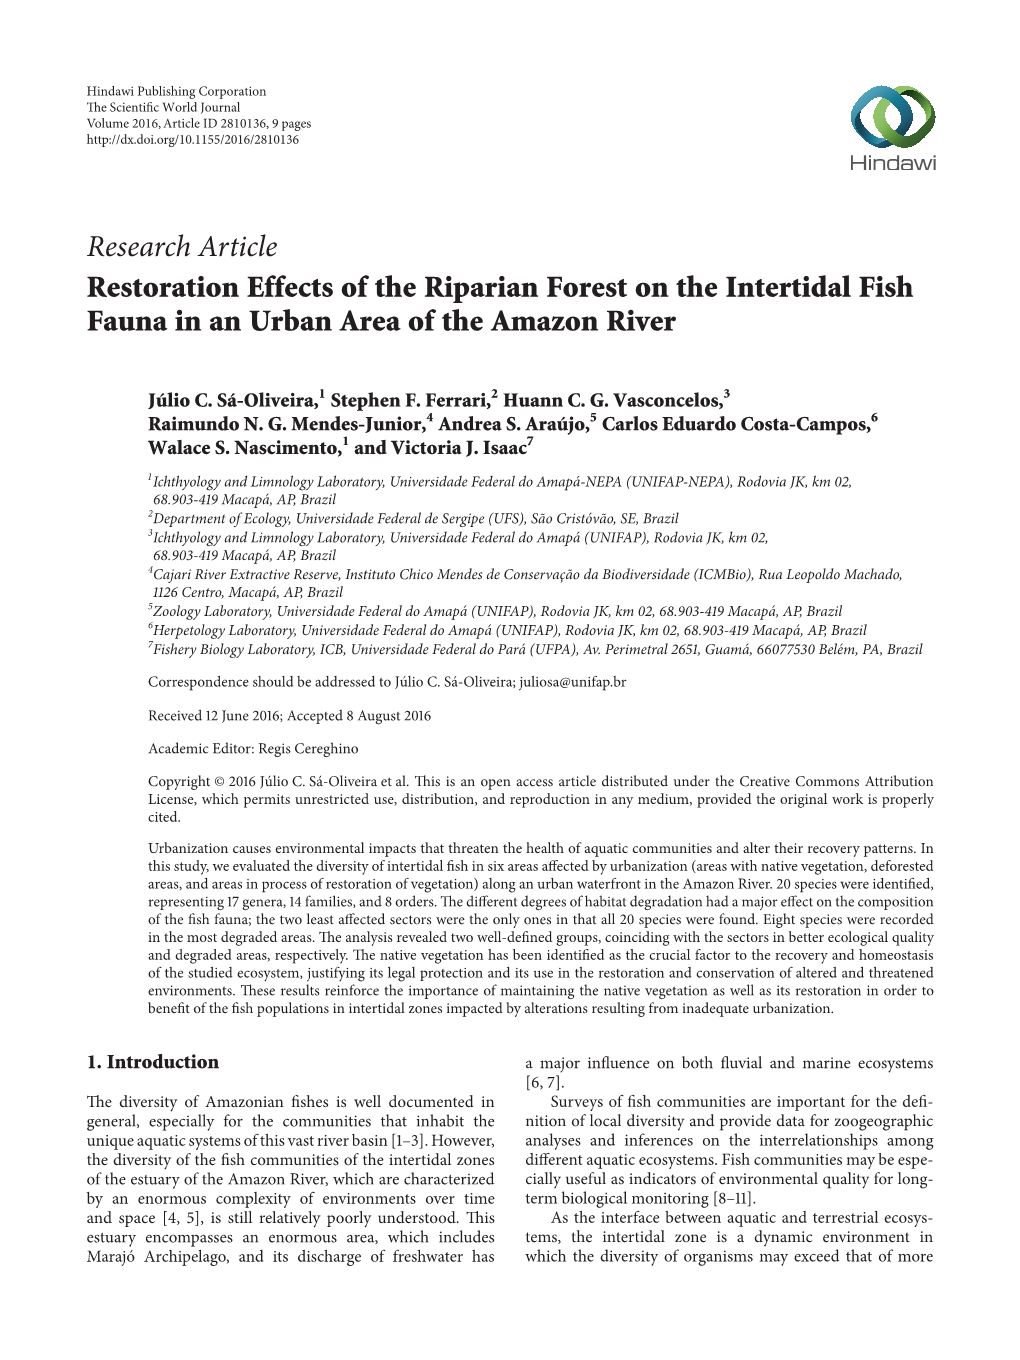 Research Article Restoration Effects of the Riparian Forest on the Intertidal Fish Fauna in an Urban Area of the Amazon River